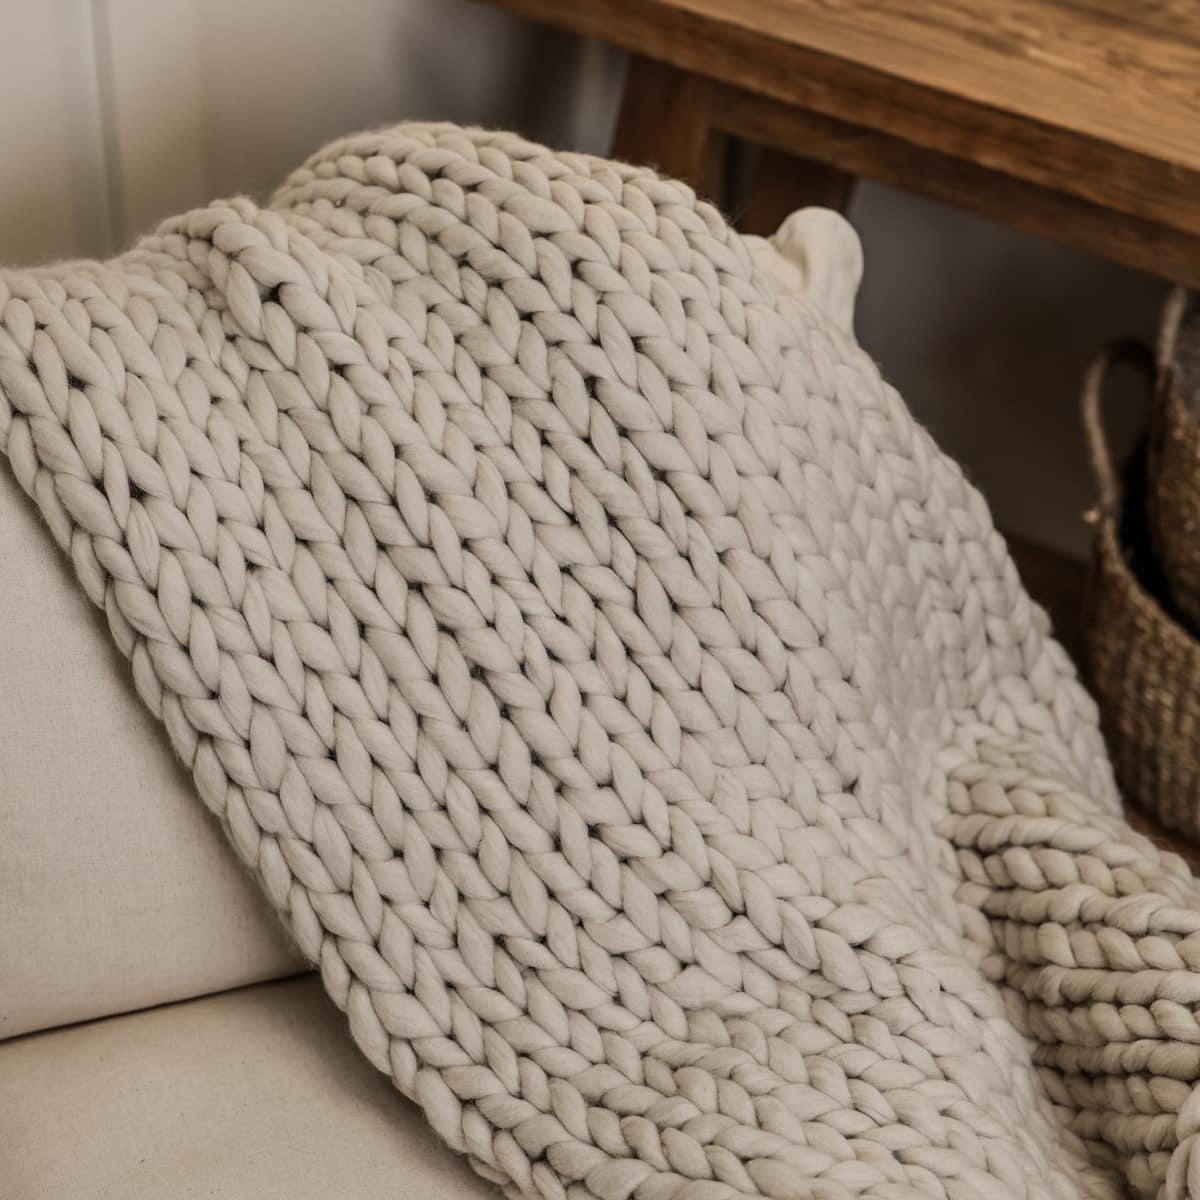 Chunky knitted blanket thrown over an armchair.